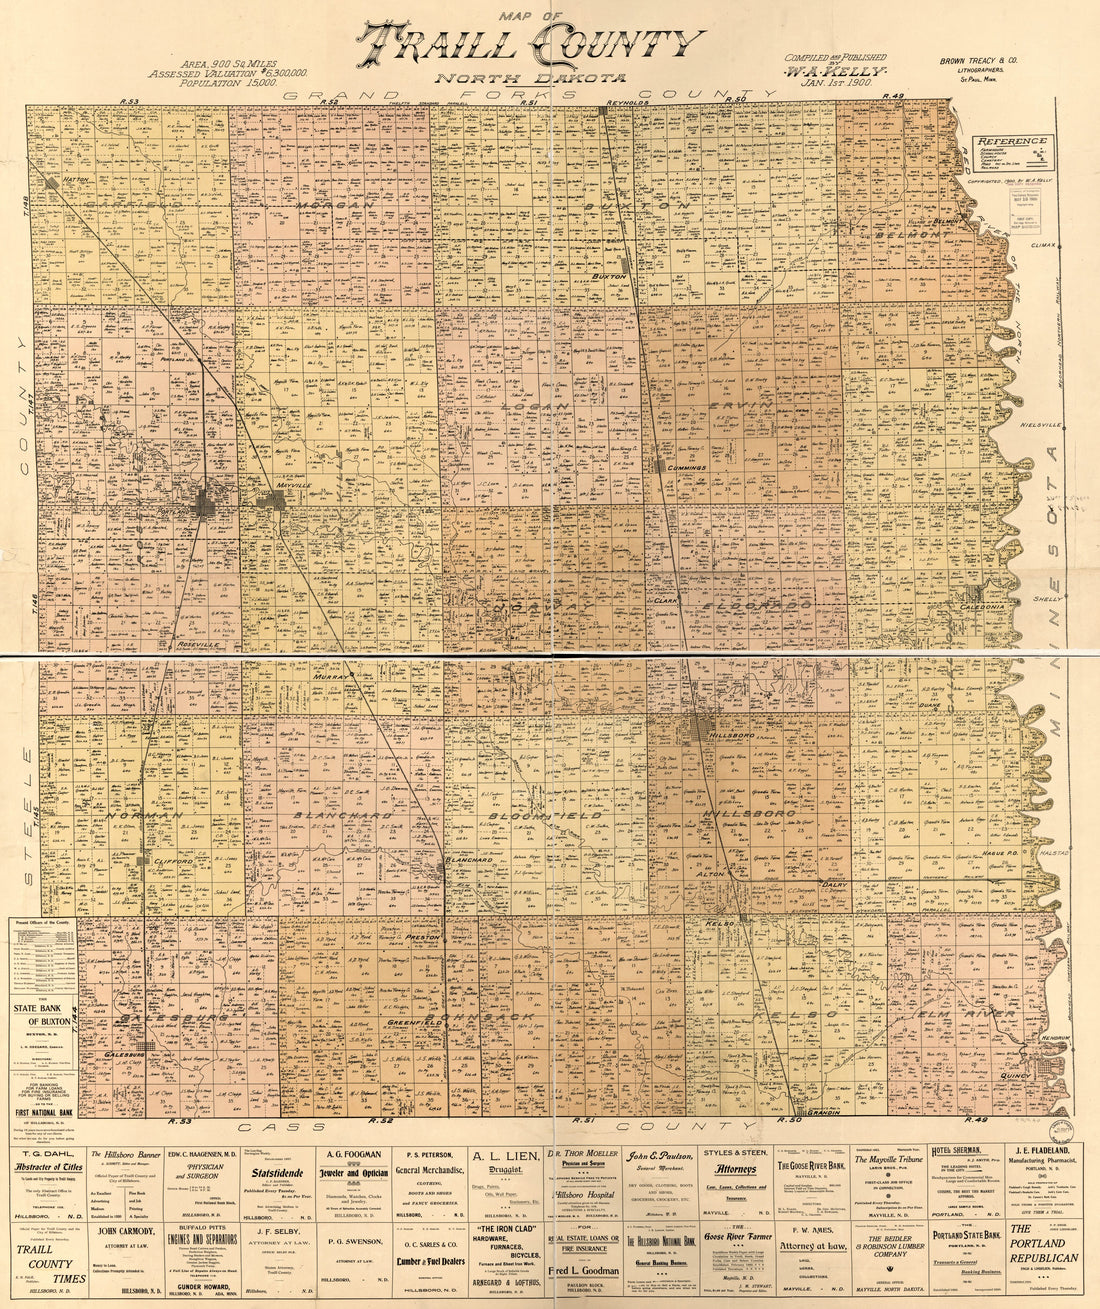 This old map of Map of Traill County, North Dakota from 1900 was created by W. A. Kelly in 1900